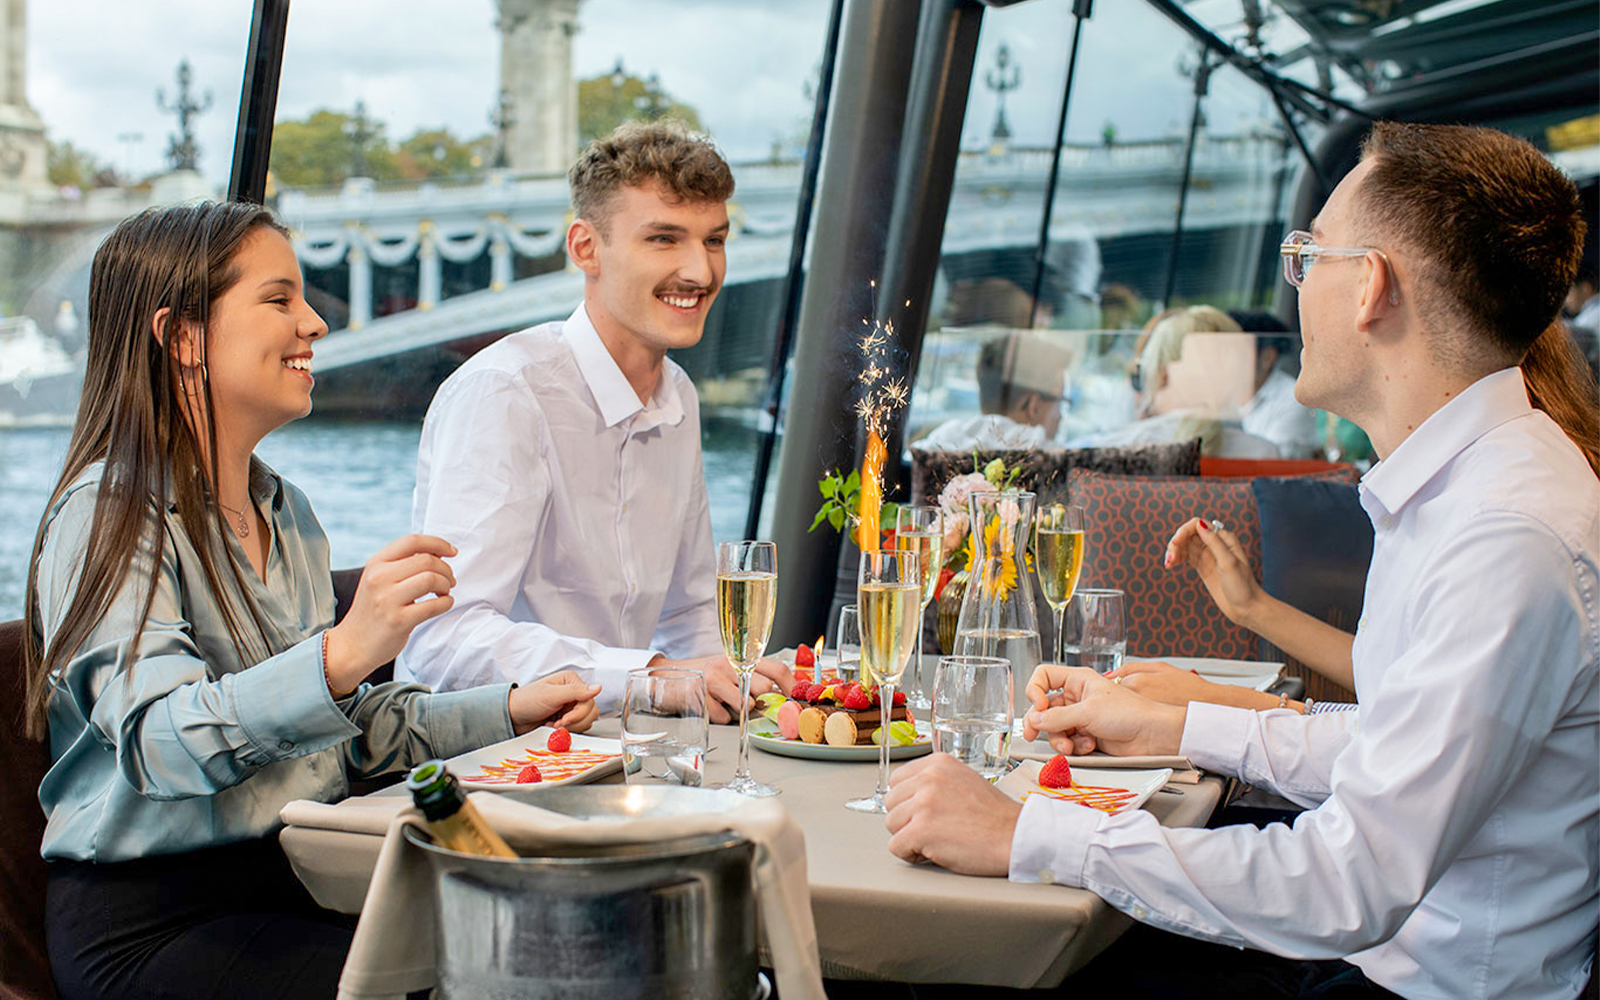 Image of Seine River Lunch Cruise on Bateaux Parisiens